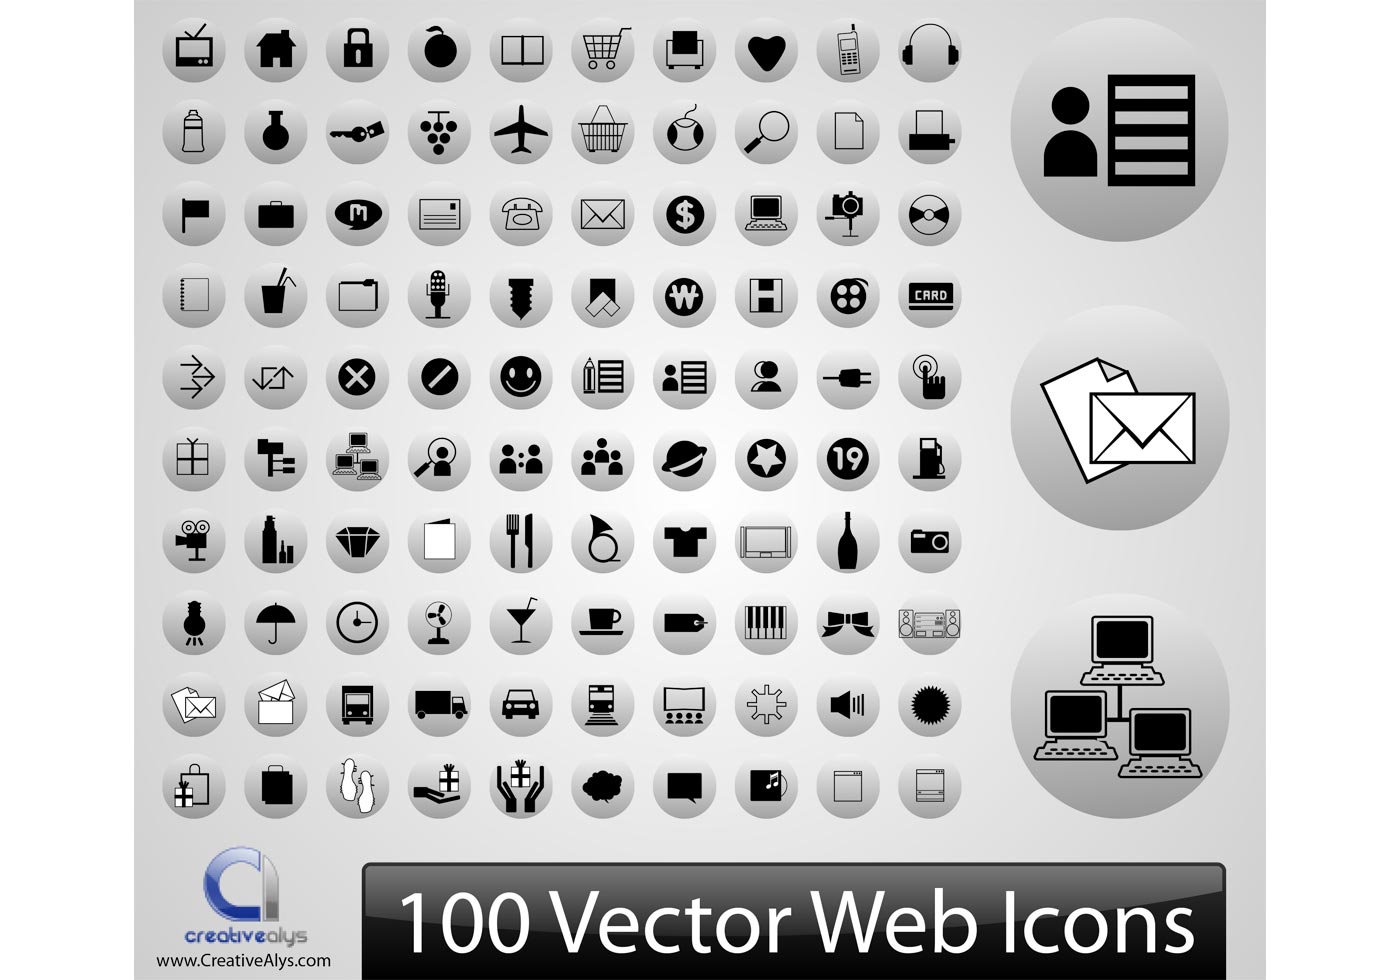 Download 100 Vector Web Icons - Download Free Vector Art, Stock Graphics & Images